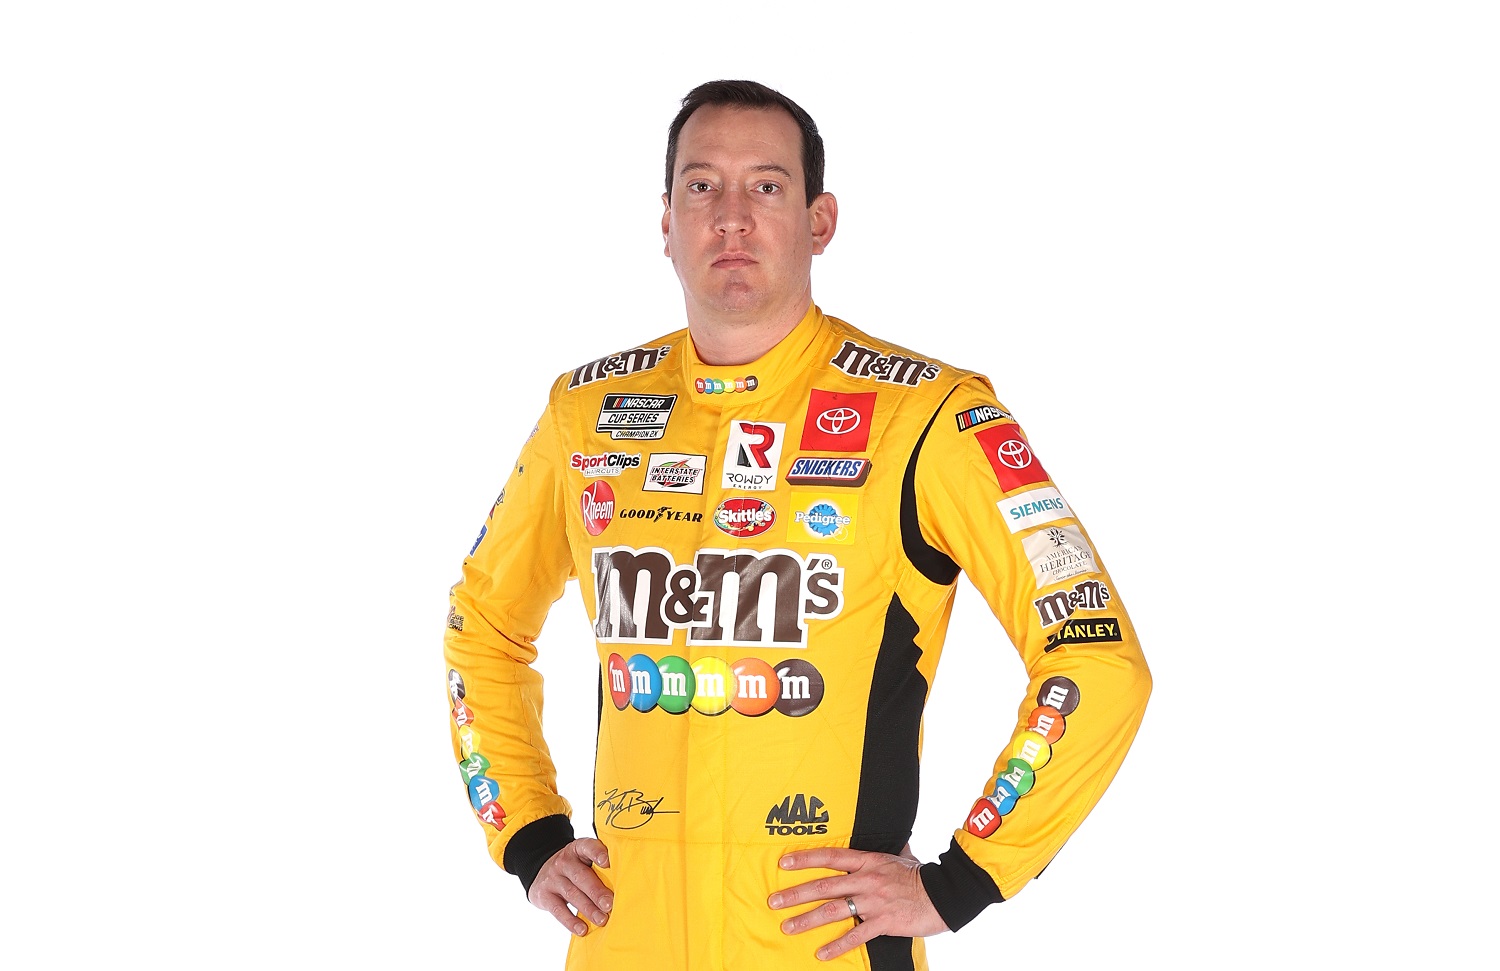 NASCAR driver Kyle Busch during NASCAR Production Days at Fox Sports Studios on Jan. 19, 2021, in Charlotte, North Carolina. | Chris Graythen/Getty Images